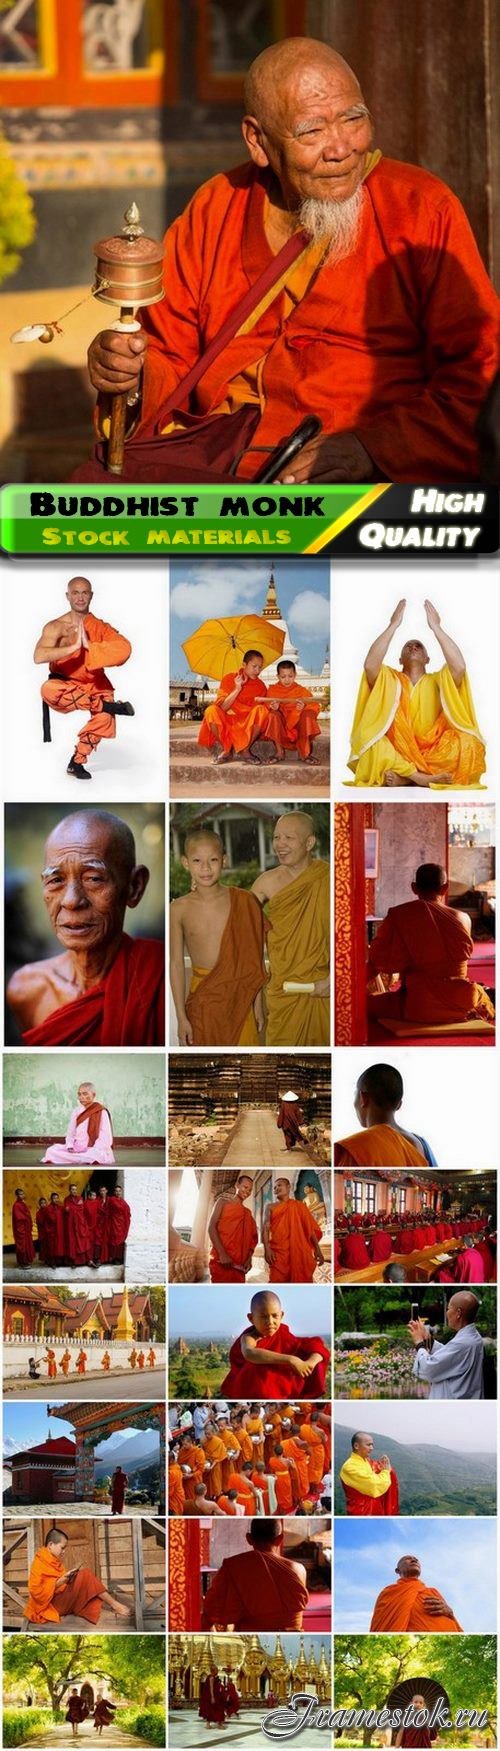 Buddhism religion and young and adult Buddhist monk - 25 HQ Jpg